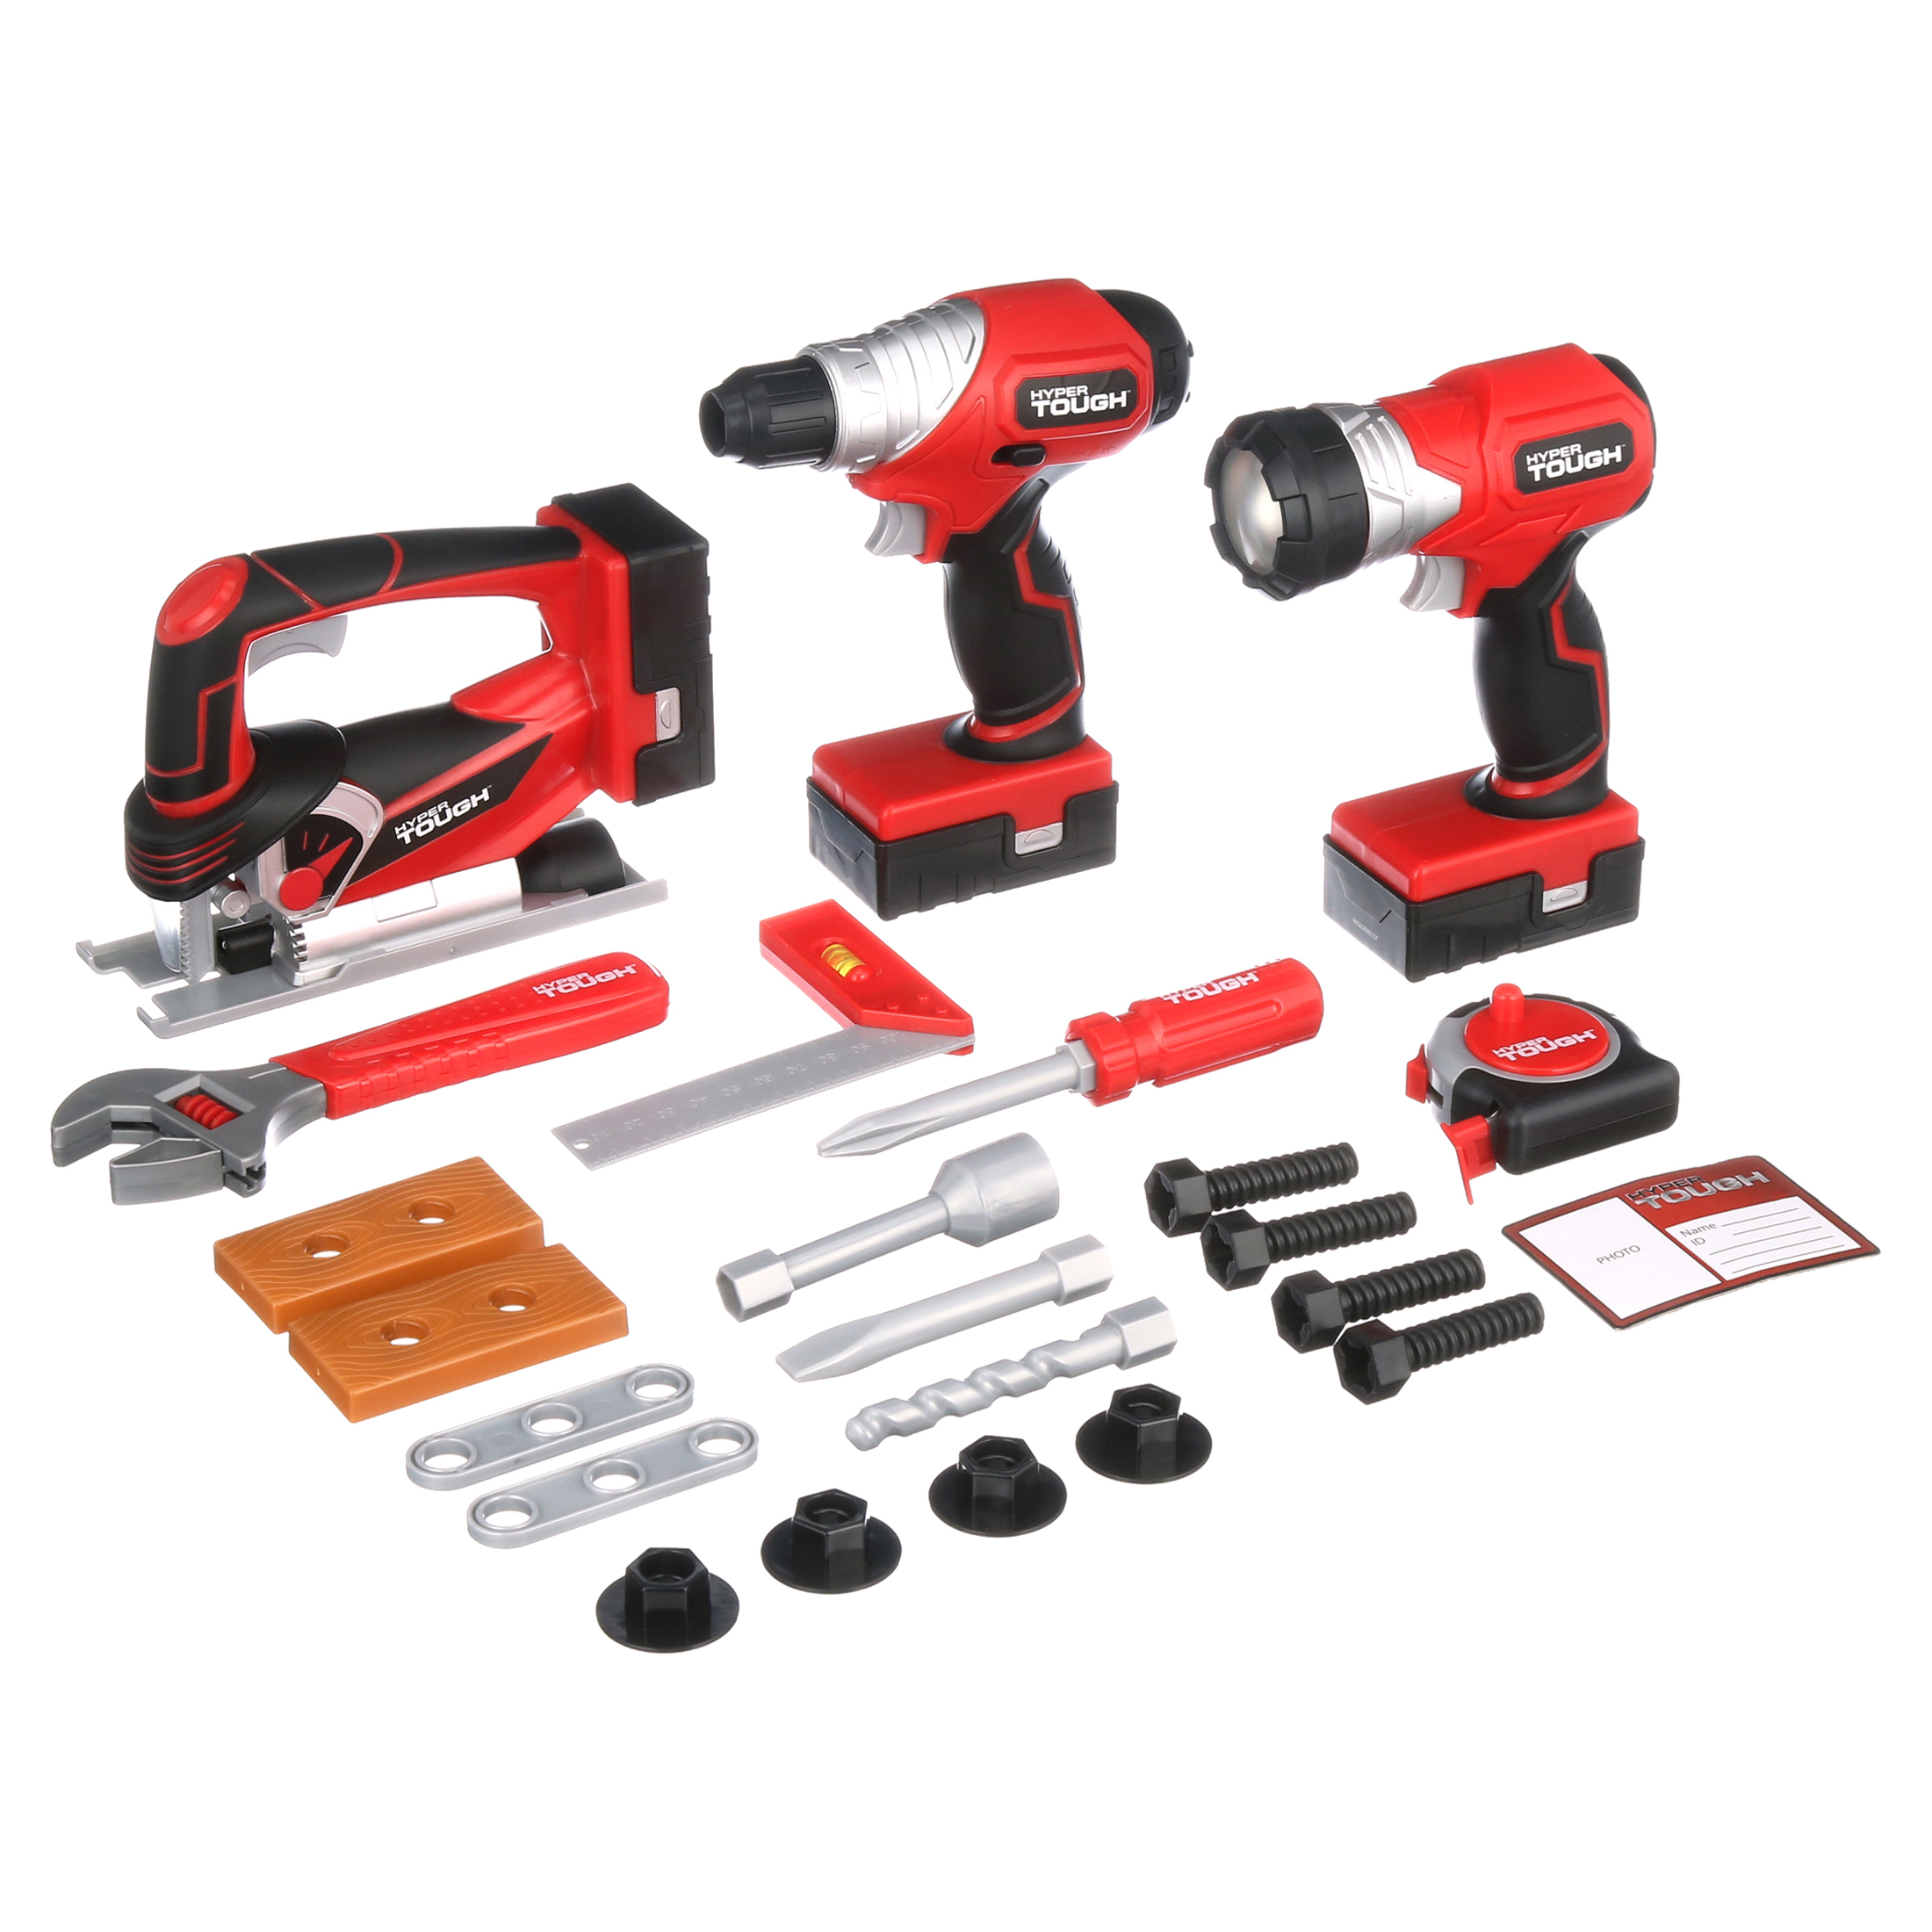 Kid Connection Power Tool Play Set, 24 Pieces - image 5 of 10